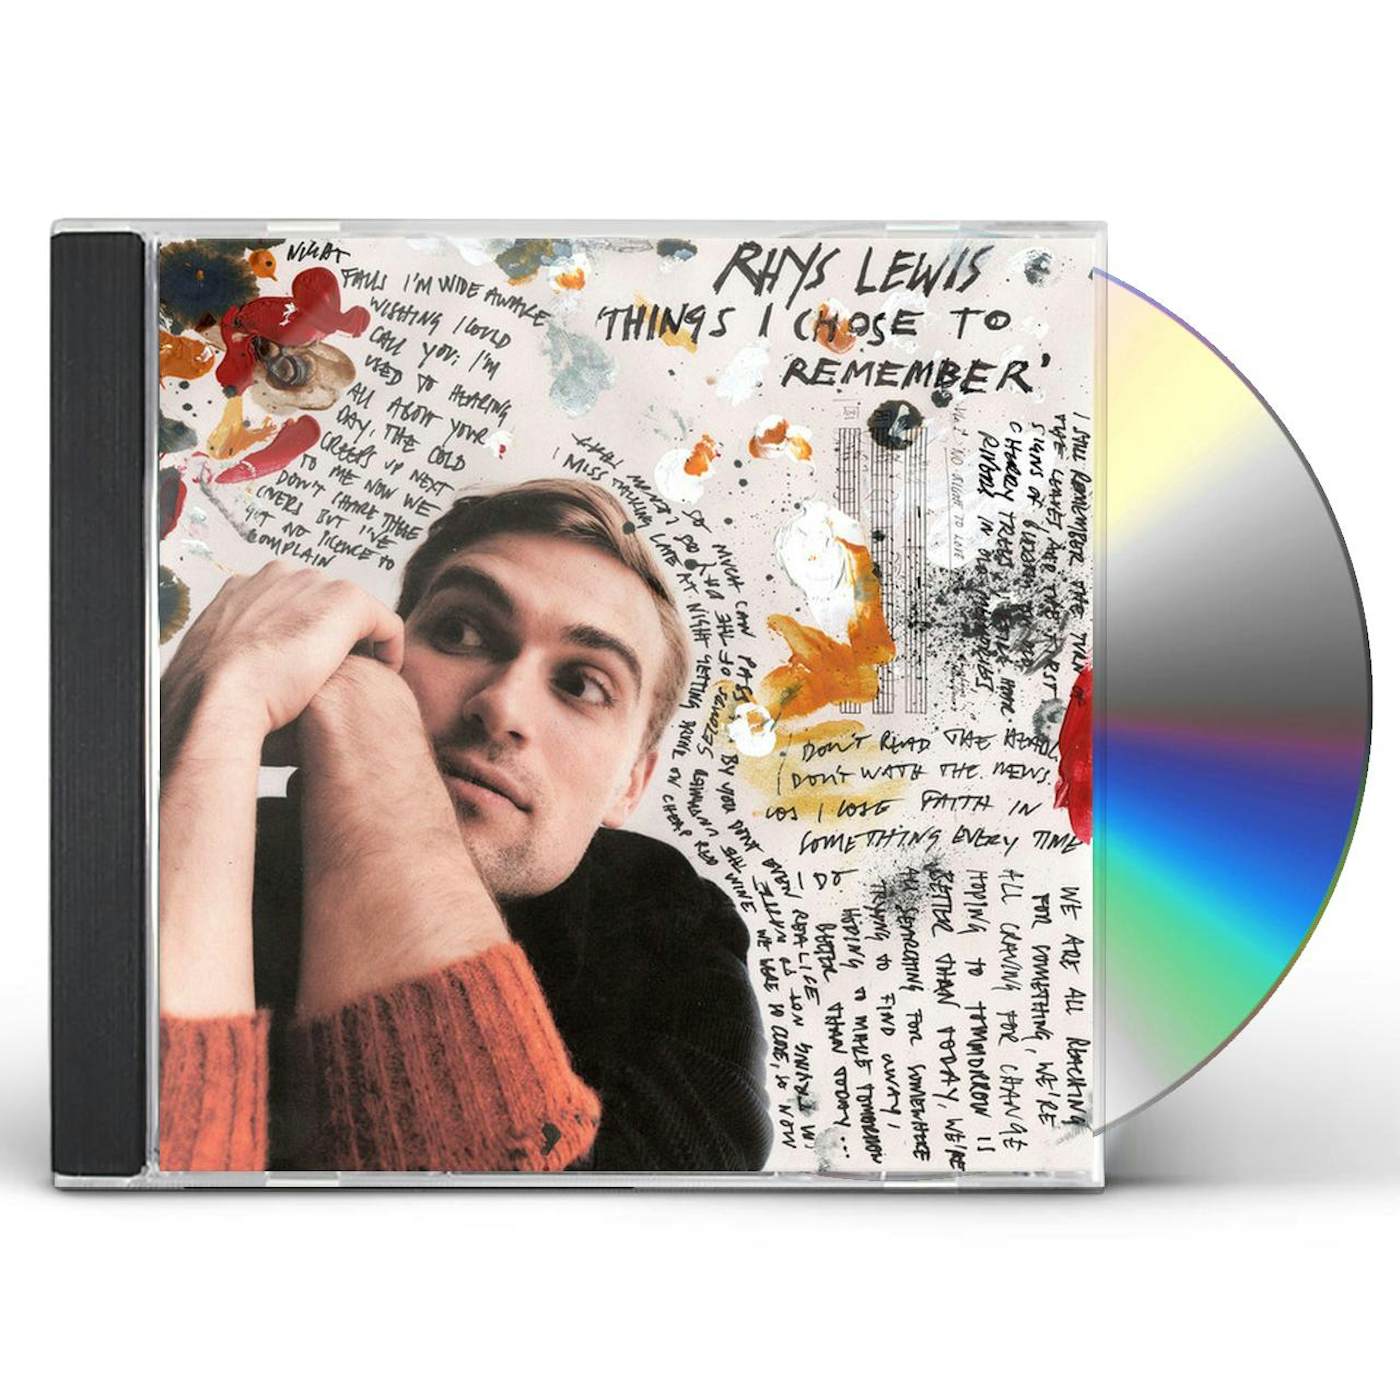 Rhys Lewis THINGS I CHOSE TO REMEMBER CD